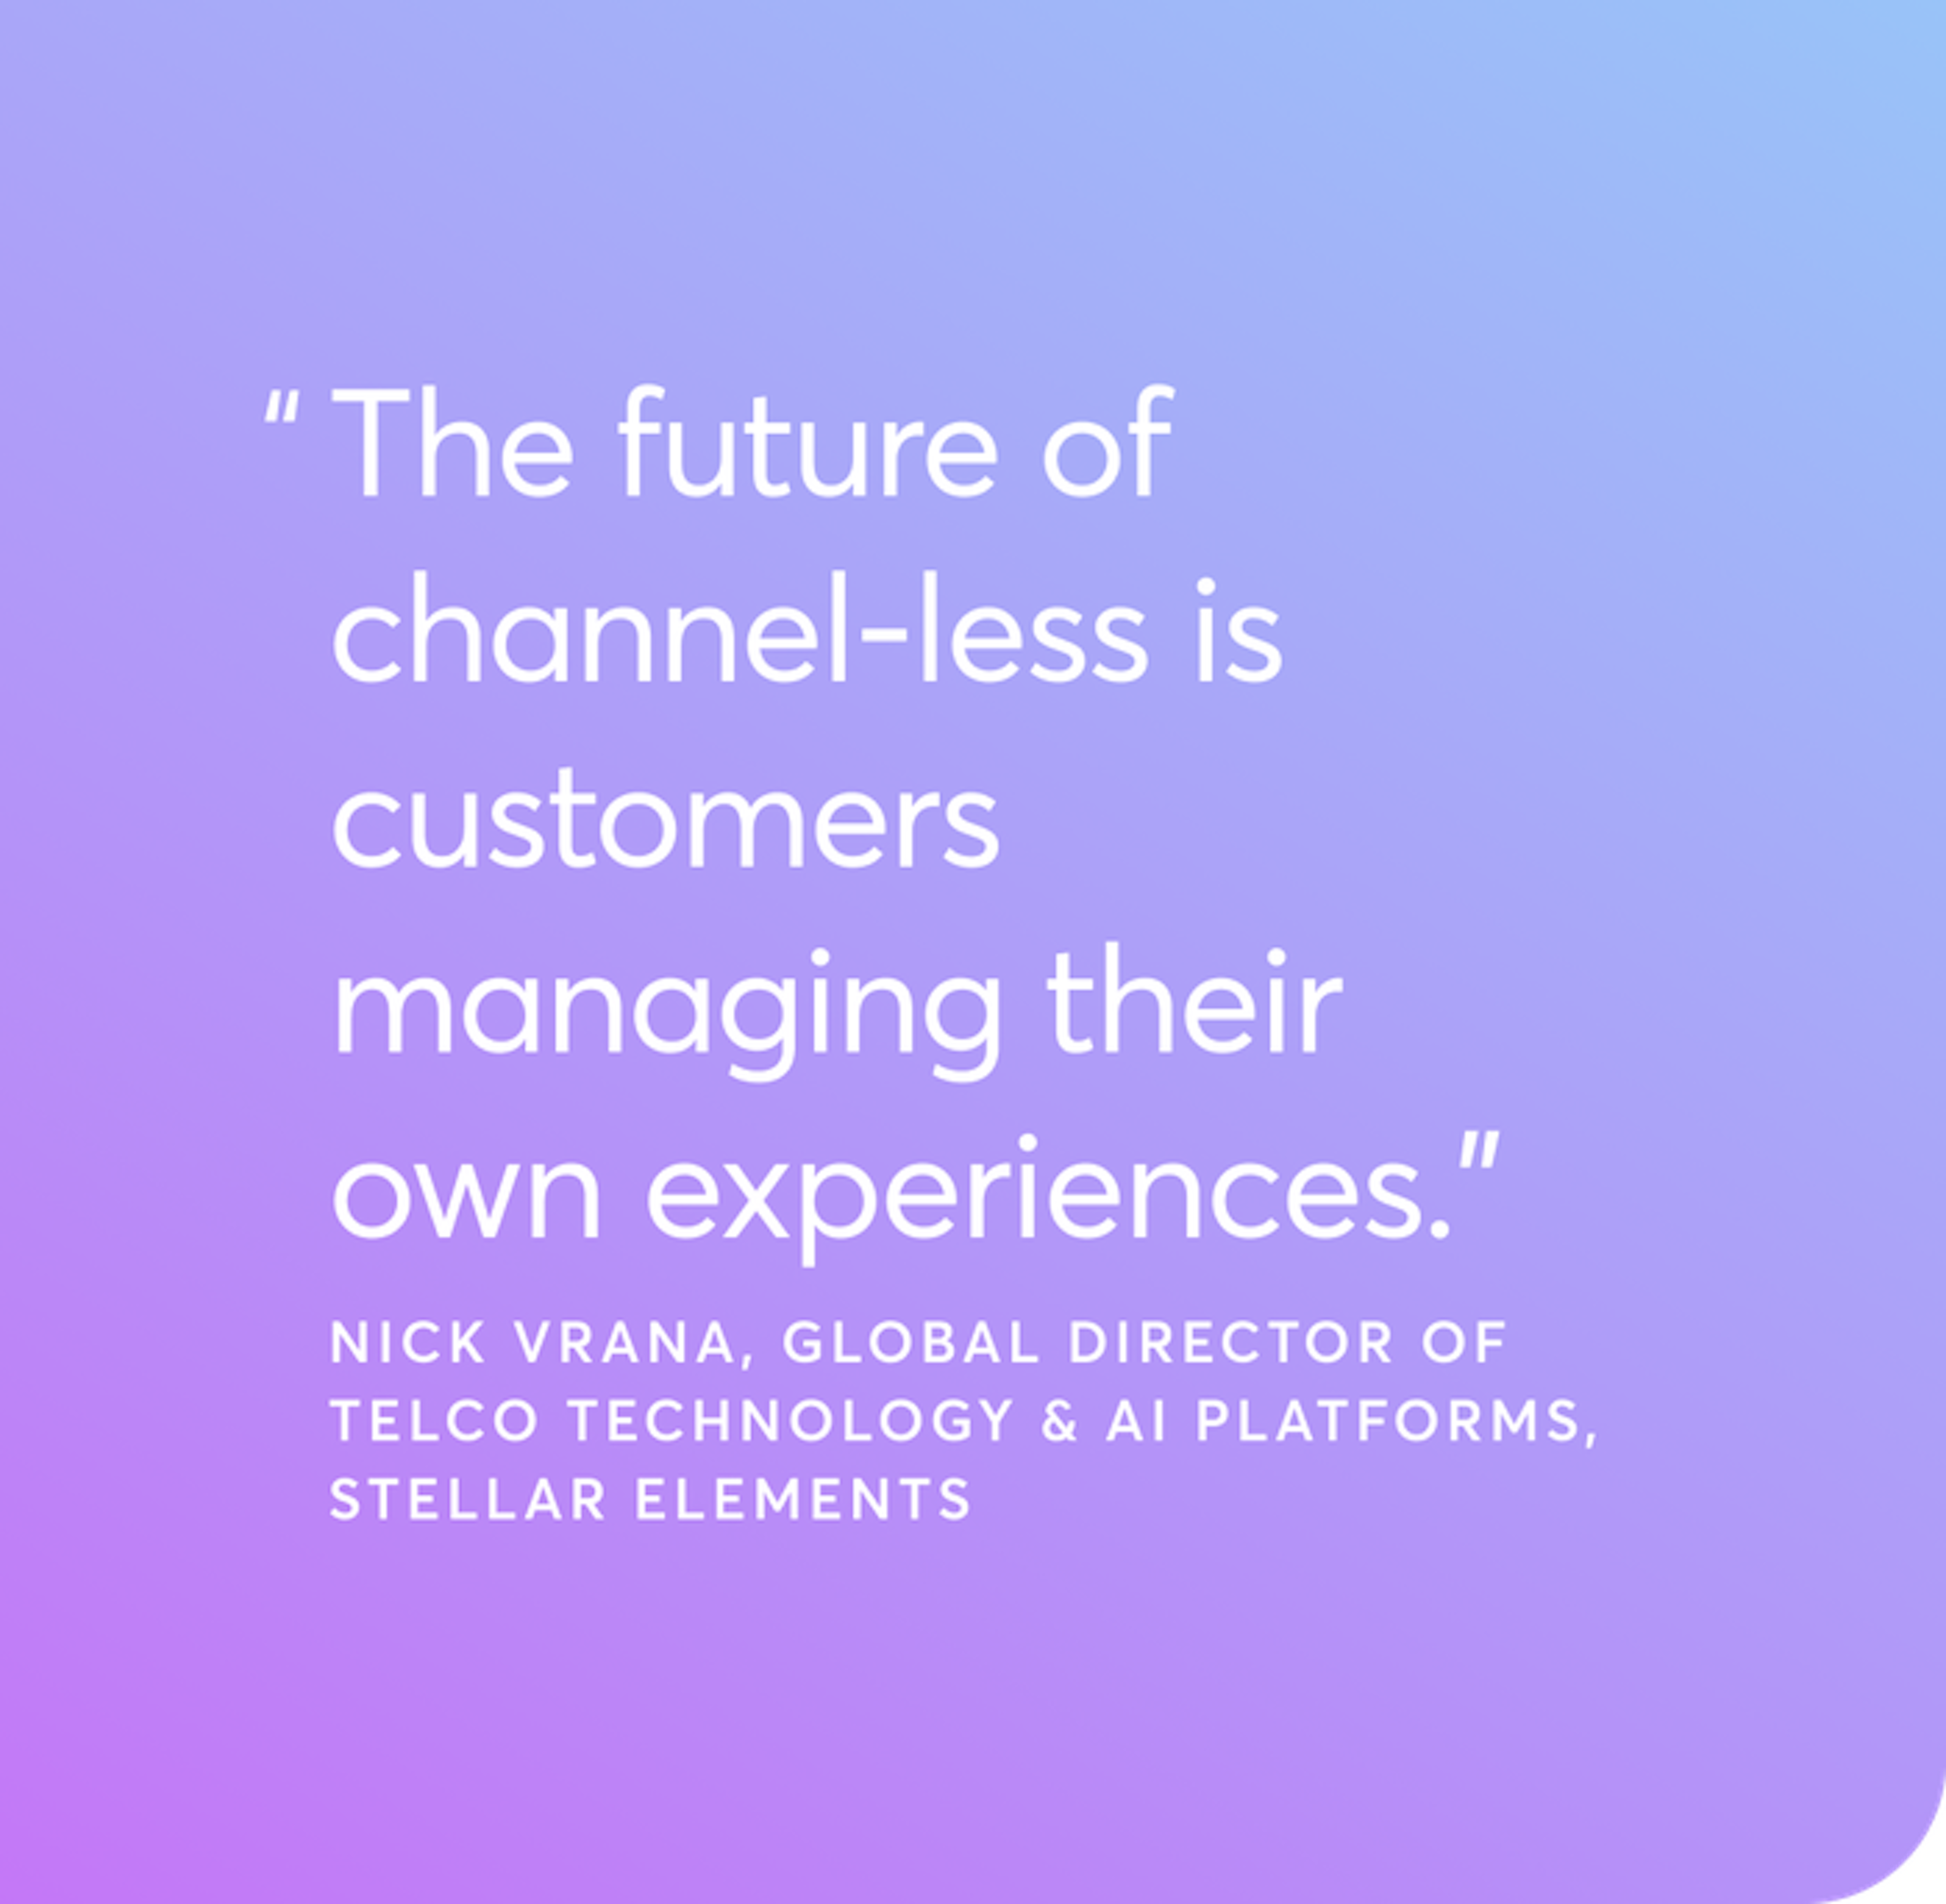 "The future of channel-less is customers managing their own experiences."